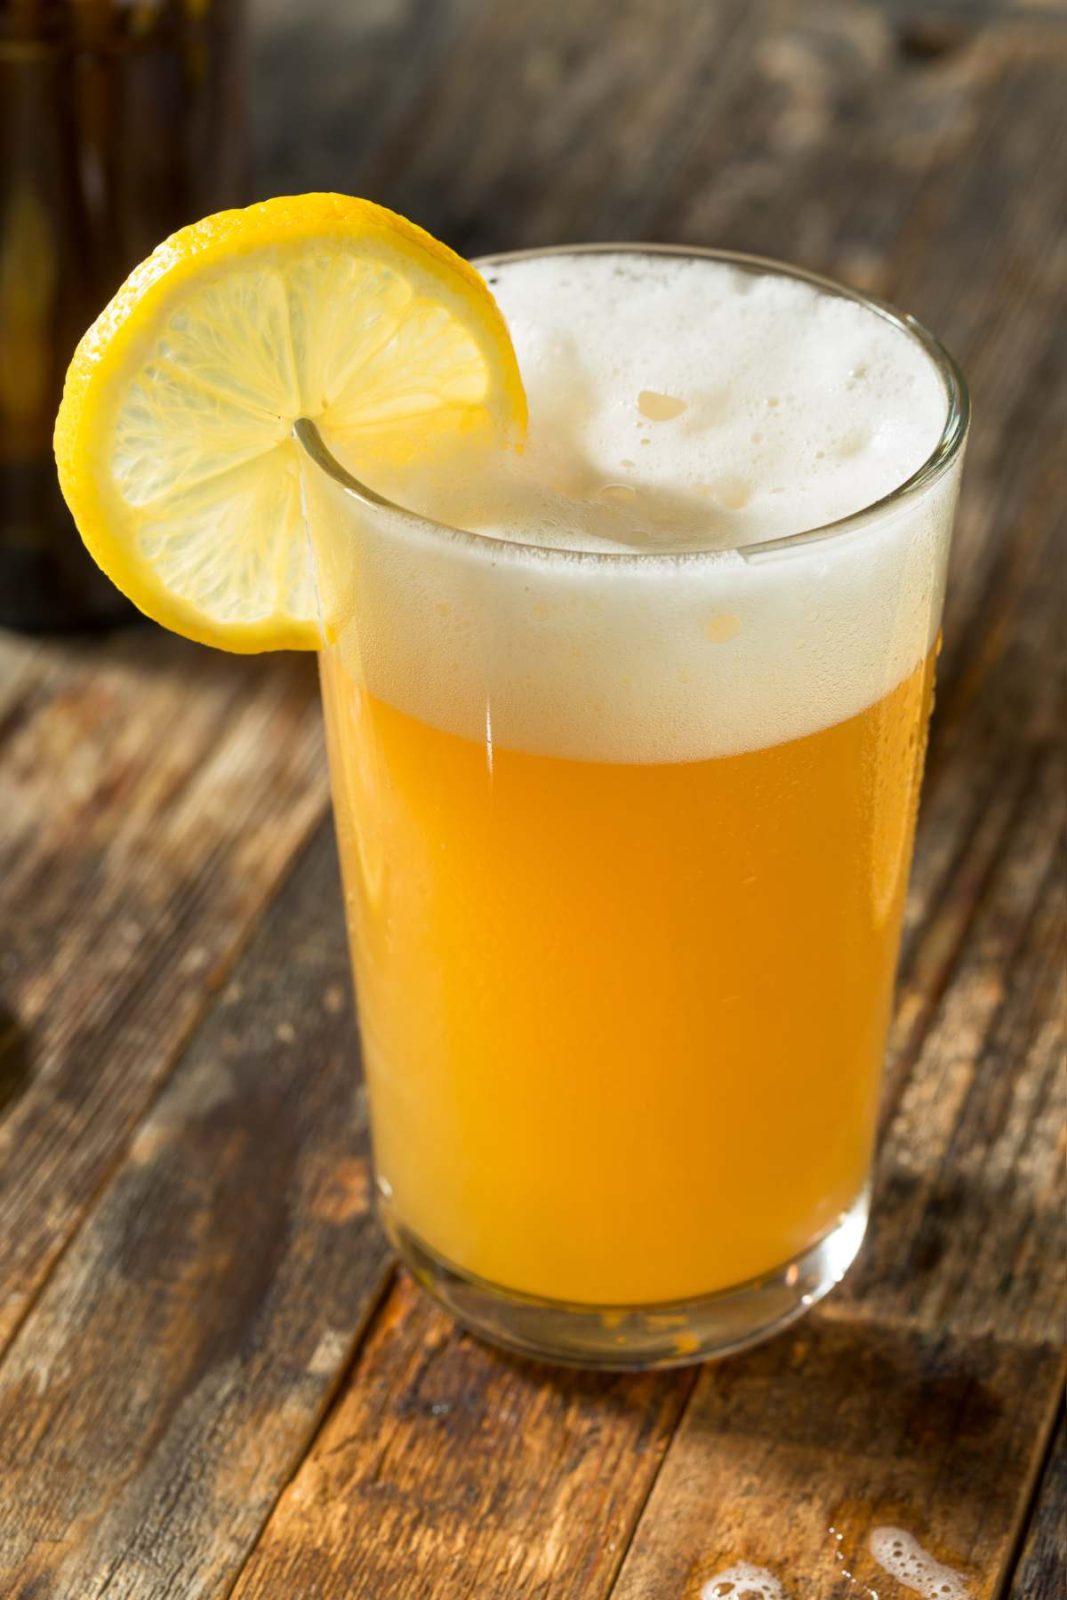 There's nothing quite like enjoying a refreshing Summer Shandy Beer for a hot summer day. This delightful beverage combines the crispness of beer with the zestiness of citrus, making it a popular choice for those seeking a light and invigorating drink during the warmer months.